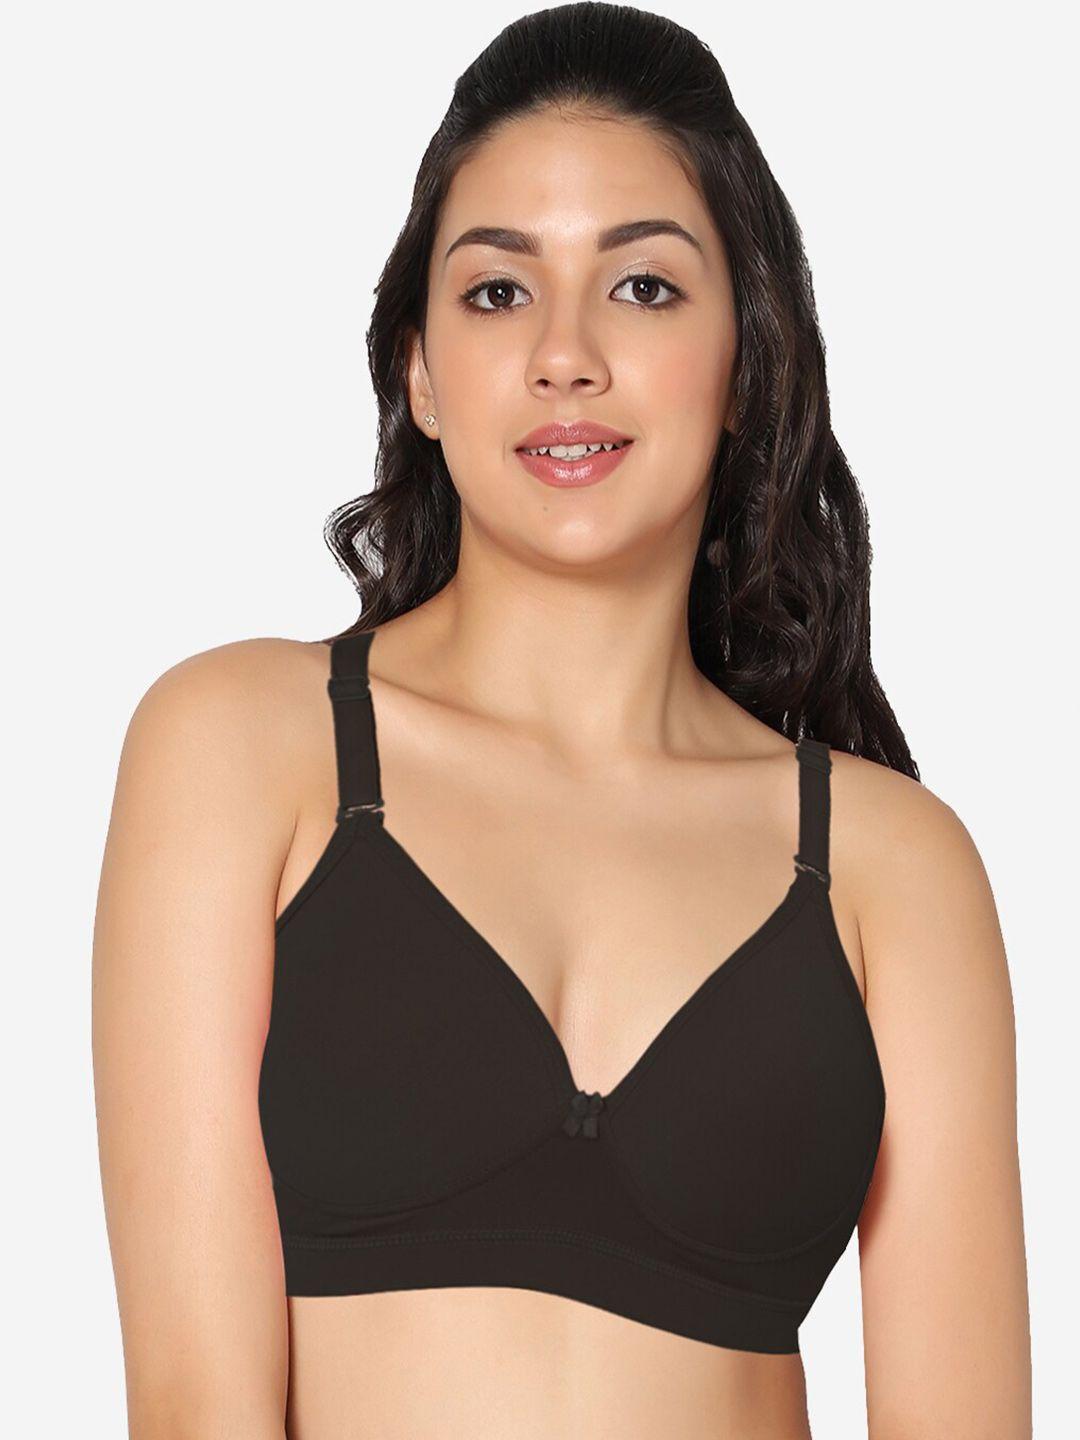 in-care-full-coverage-heavily-padded-pure-cotton-push-up-bra-with-all-day-comfort